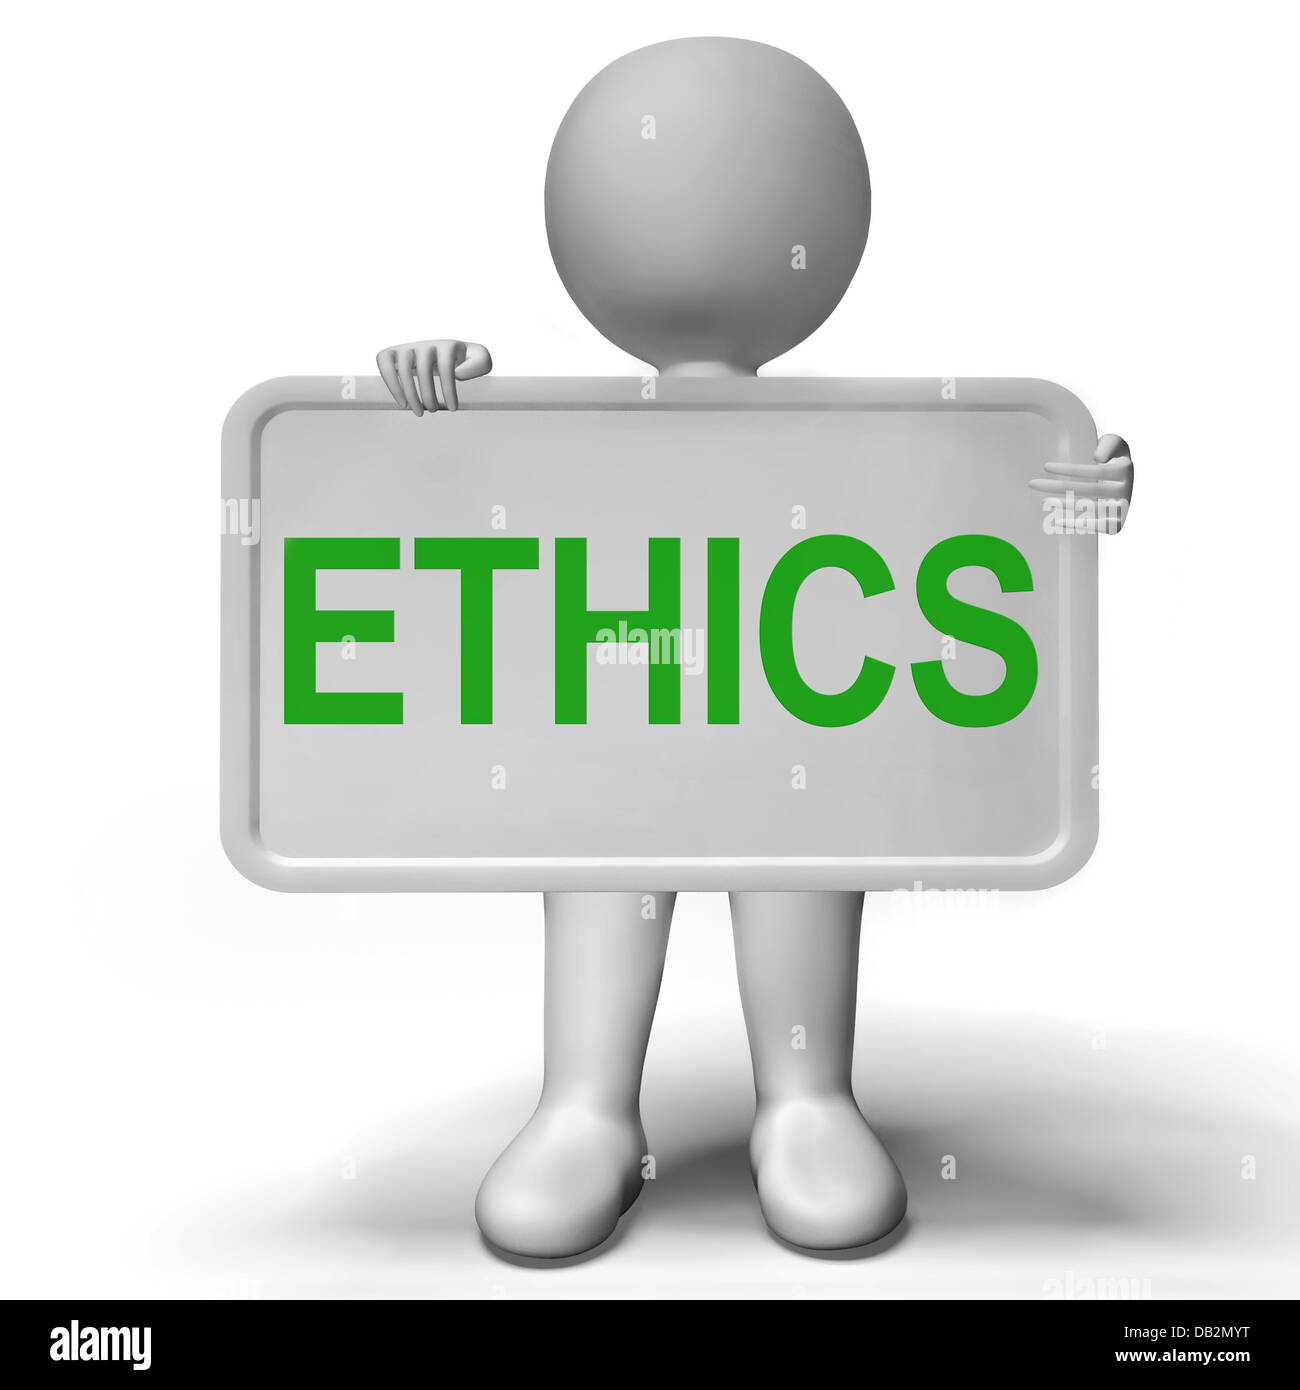 Ethics Sign Showing Values Ideology And Principles Stock Photo